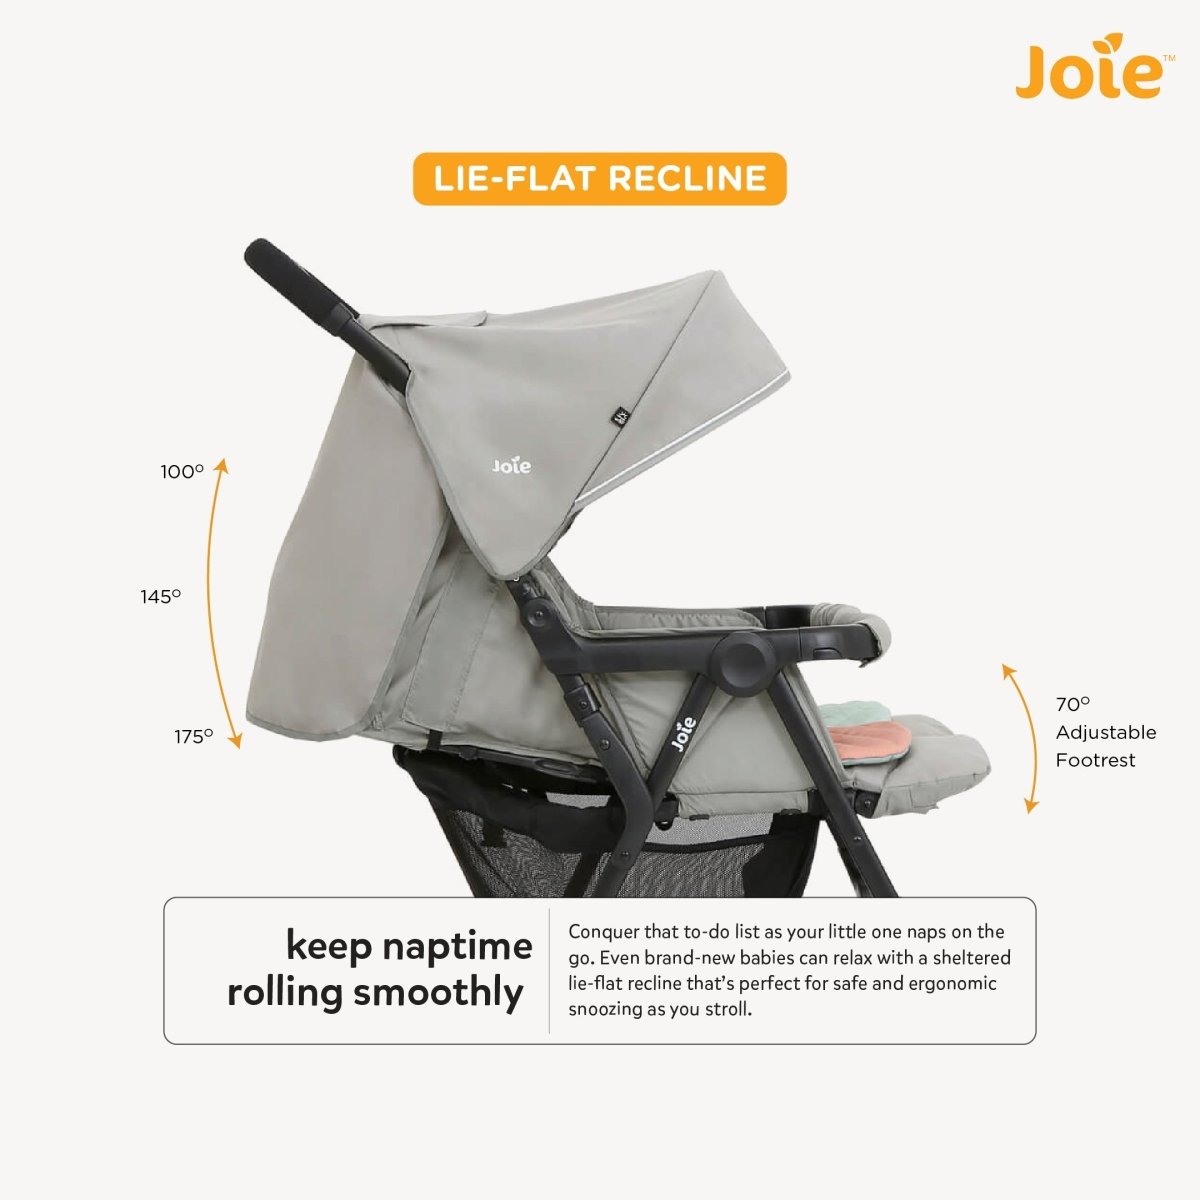 Joie Aire Twin W/ Rc Stroller Nectar & Mineral - S1217AENNM000